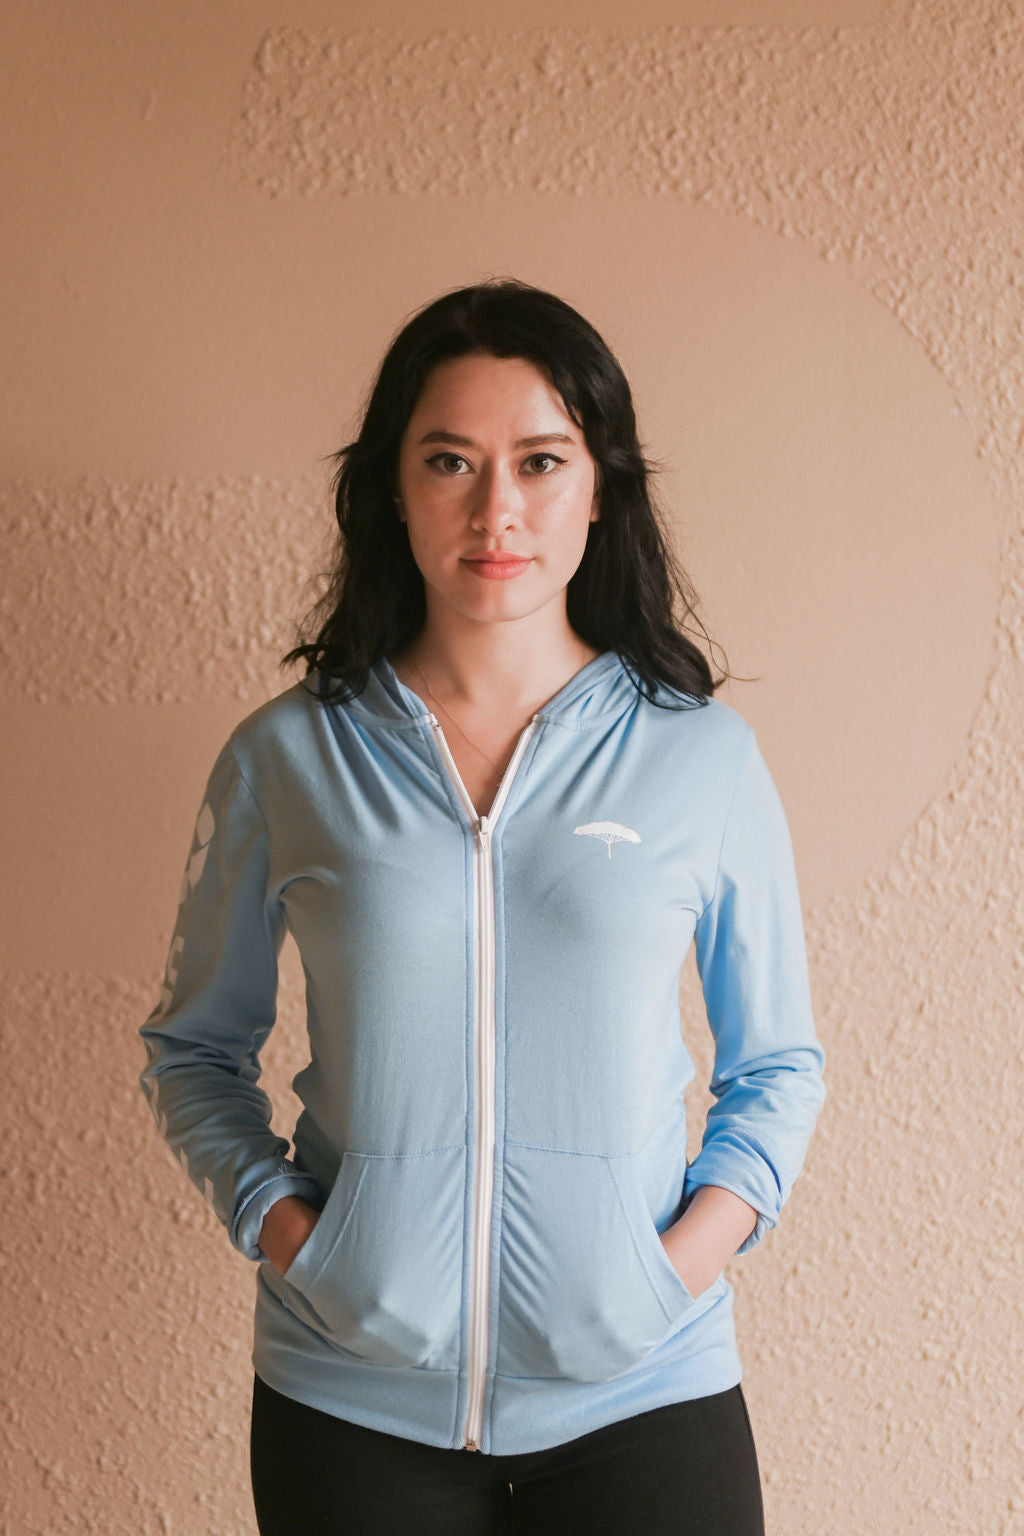 Organic unisex blue light weight zip up hoodie with white details